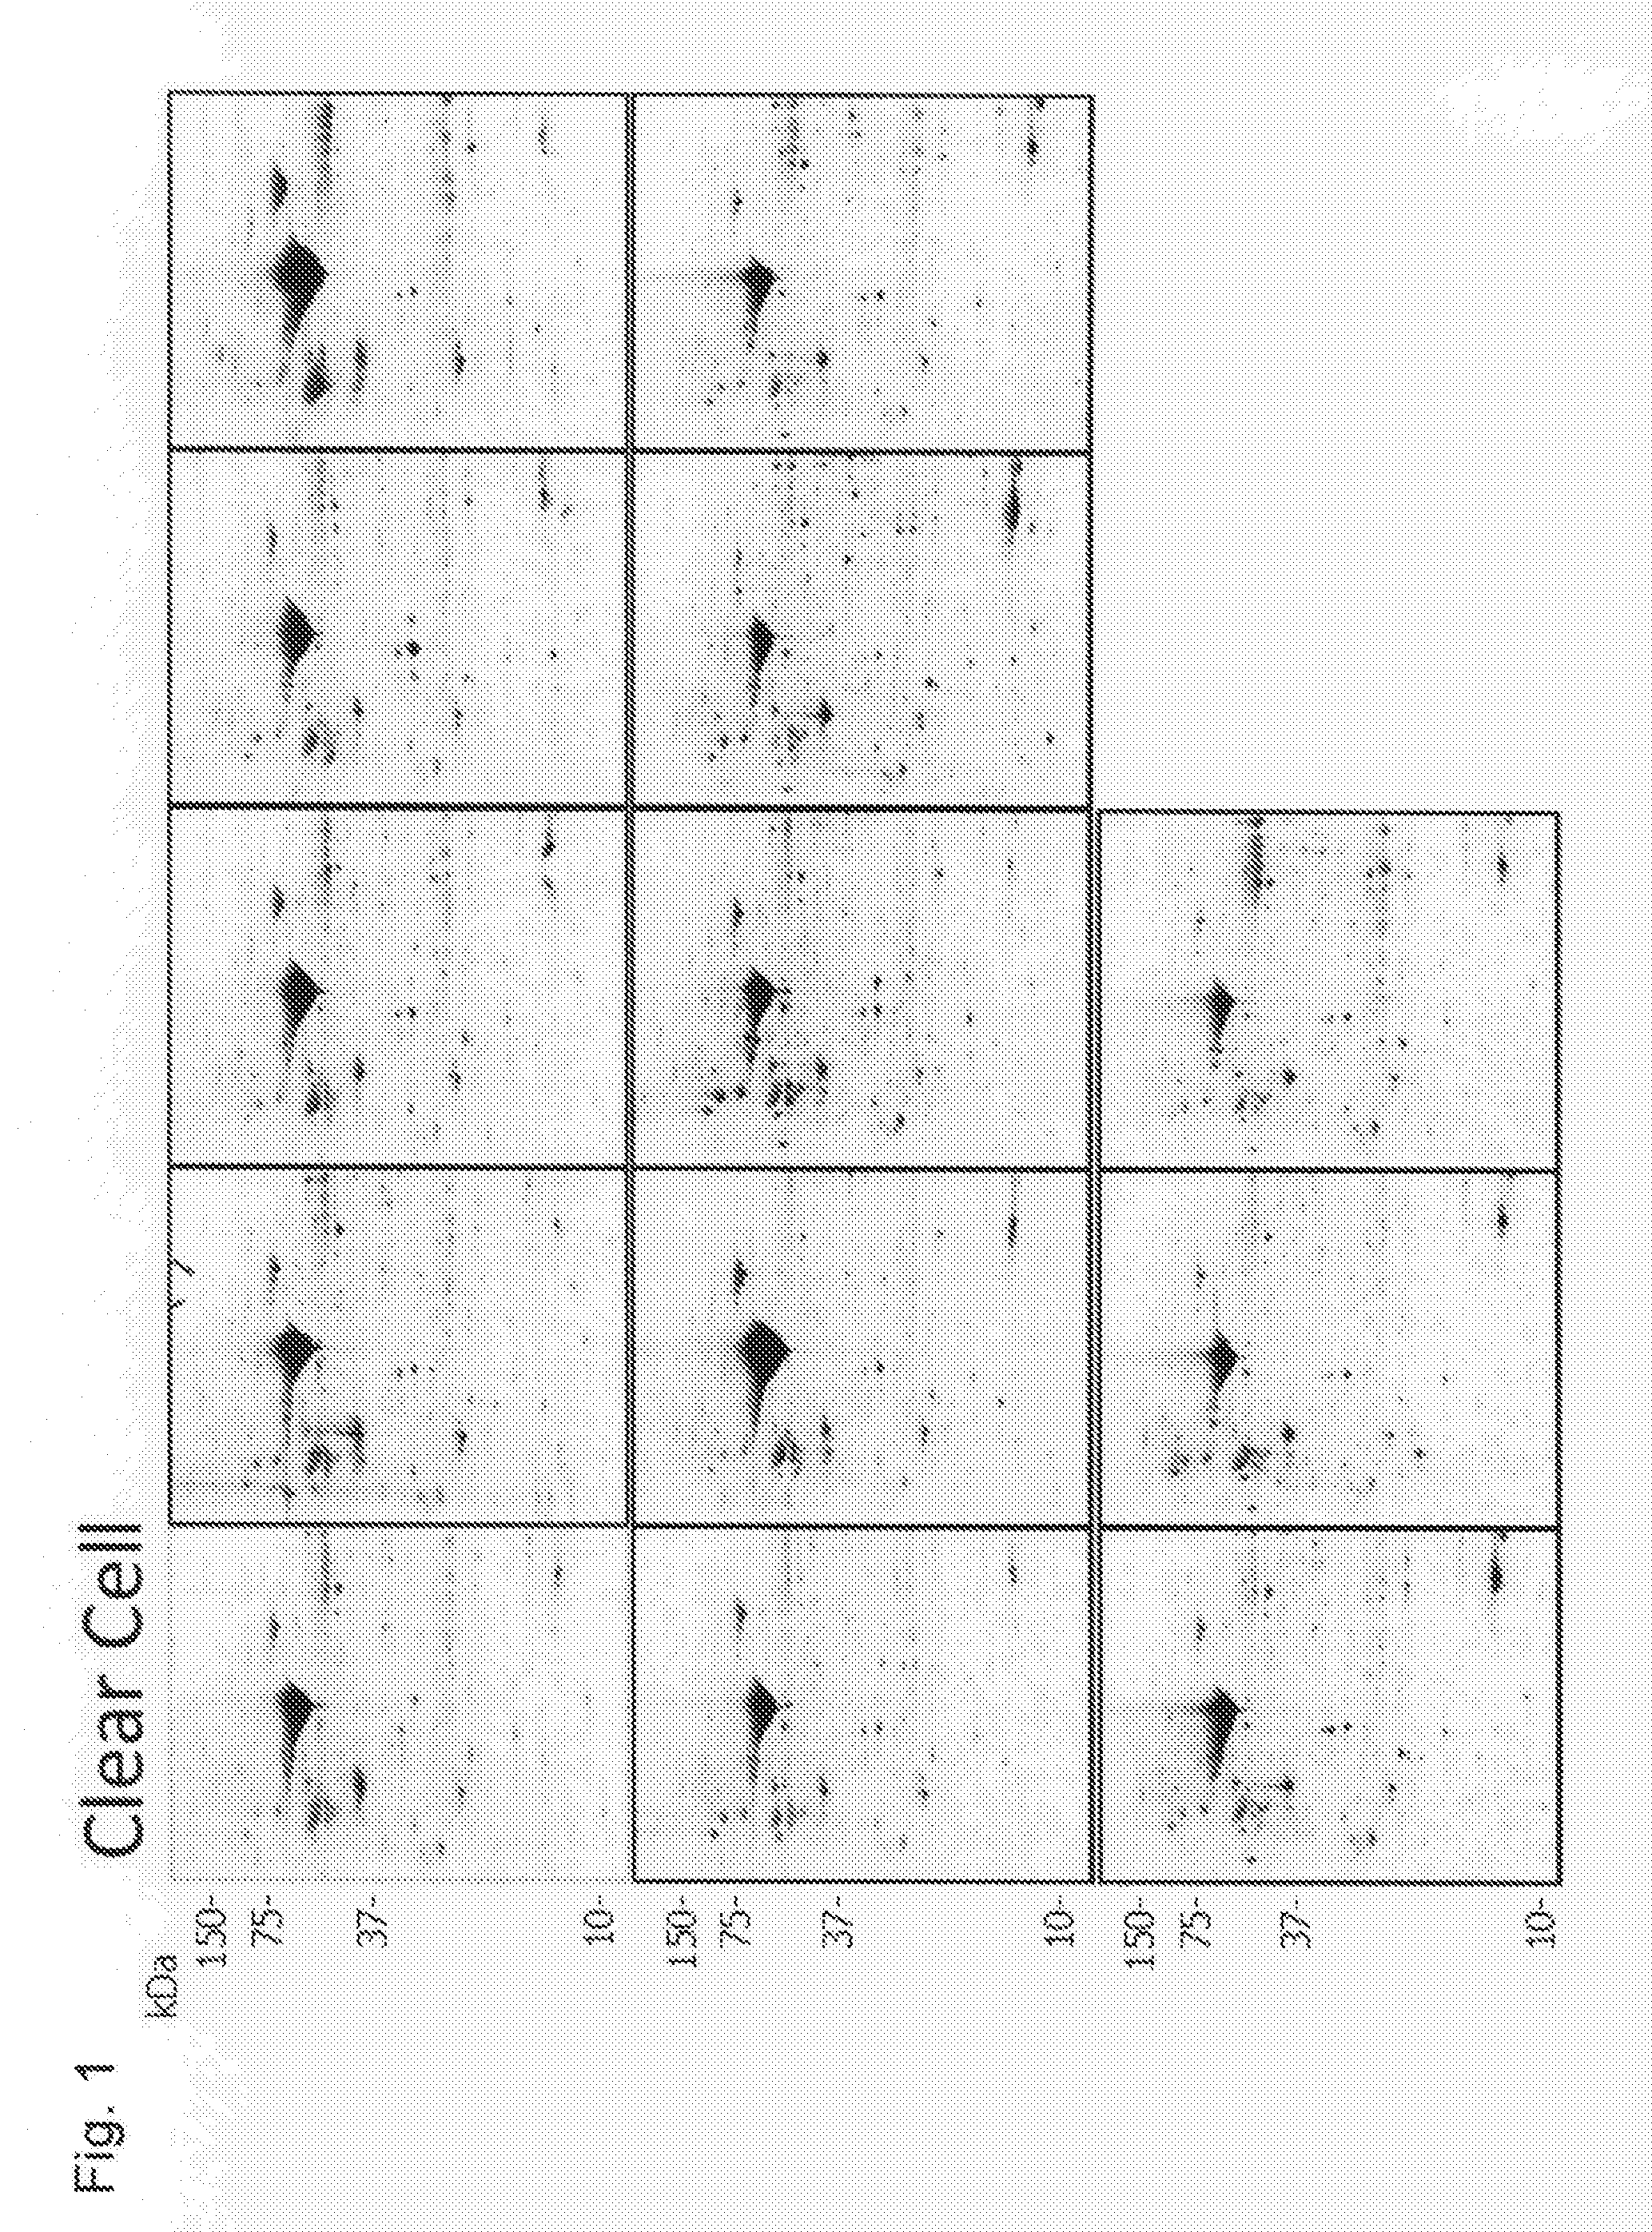 Marker for identification of tissue type of epithelial ovarian cancer, and method for determination of the occurrence of epithelial ovarian cancer based on tissue type by using the marker